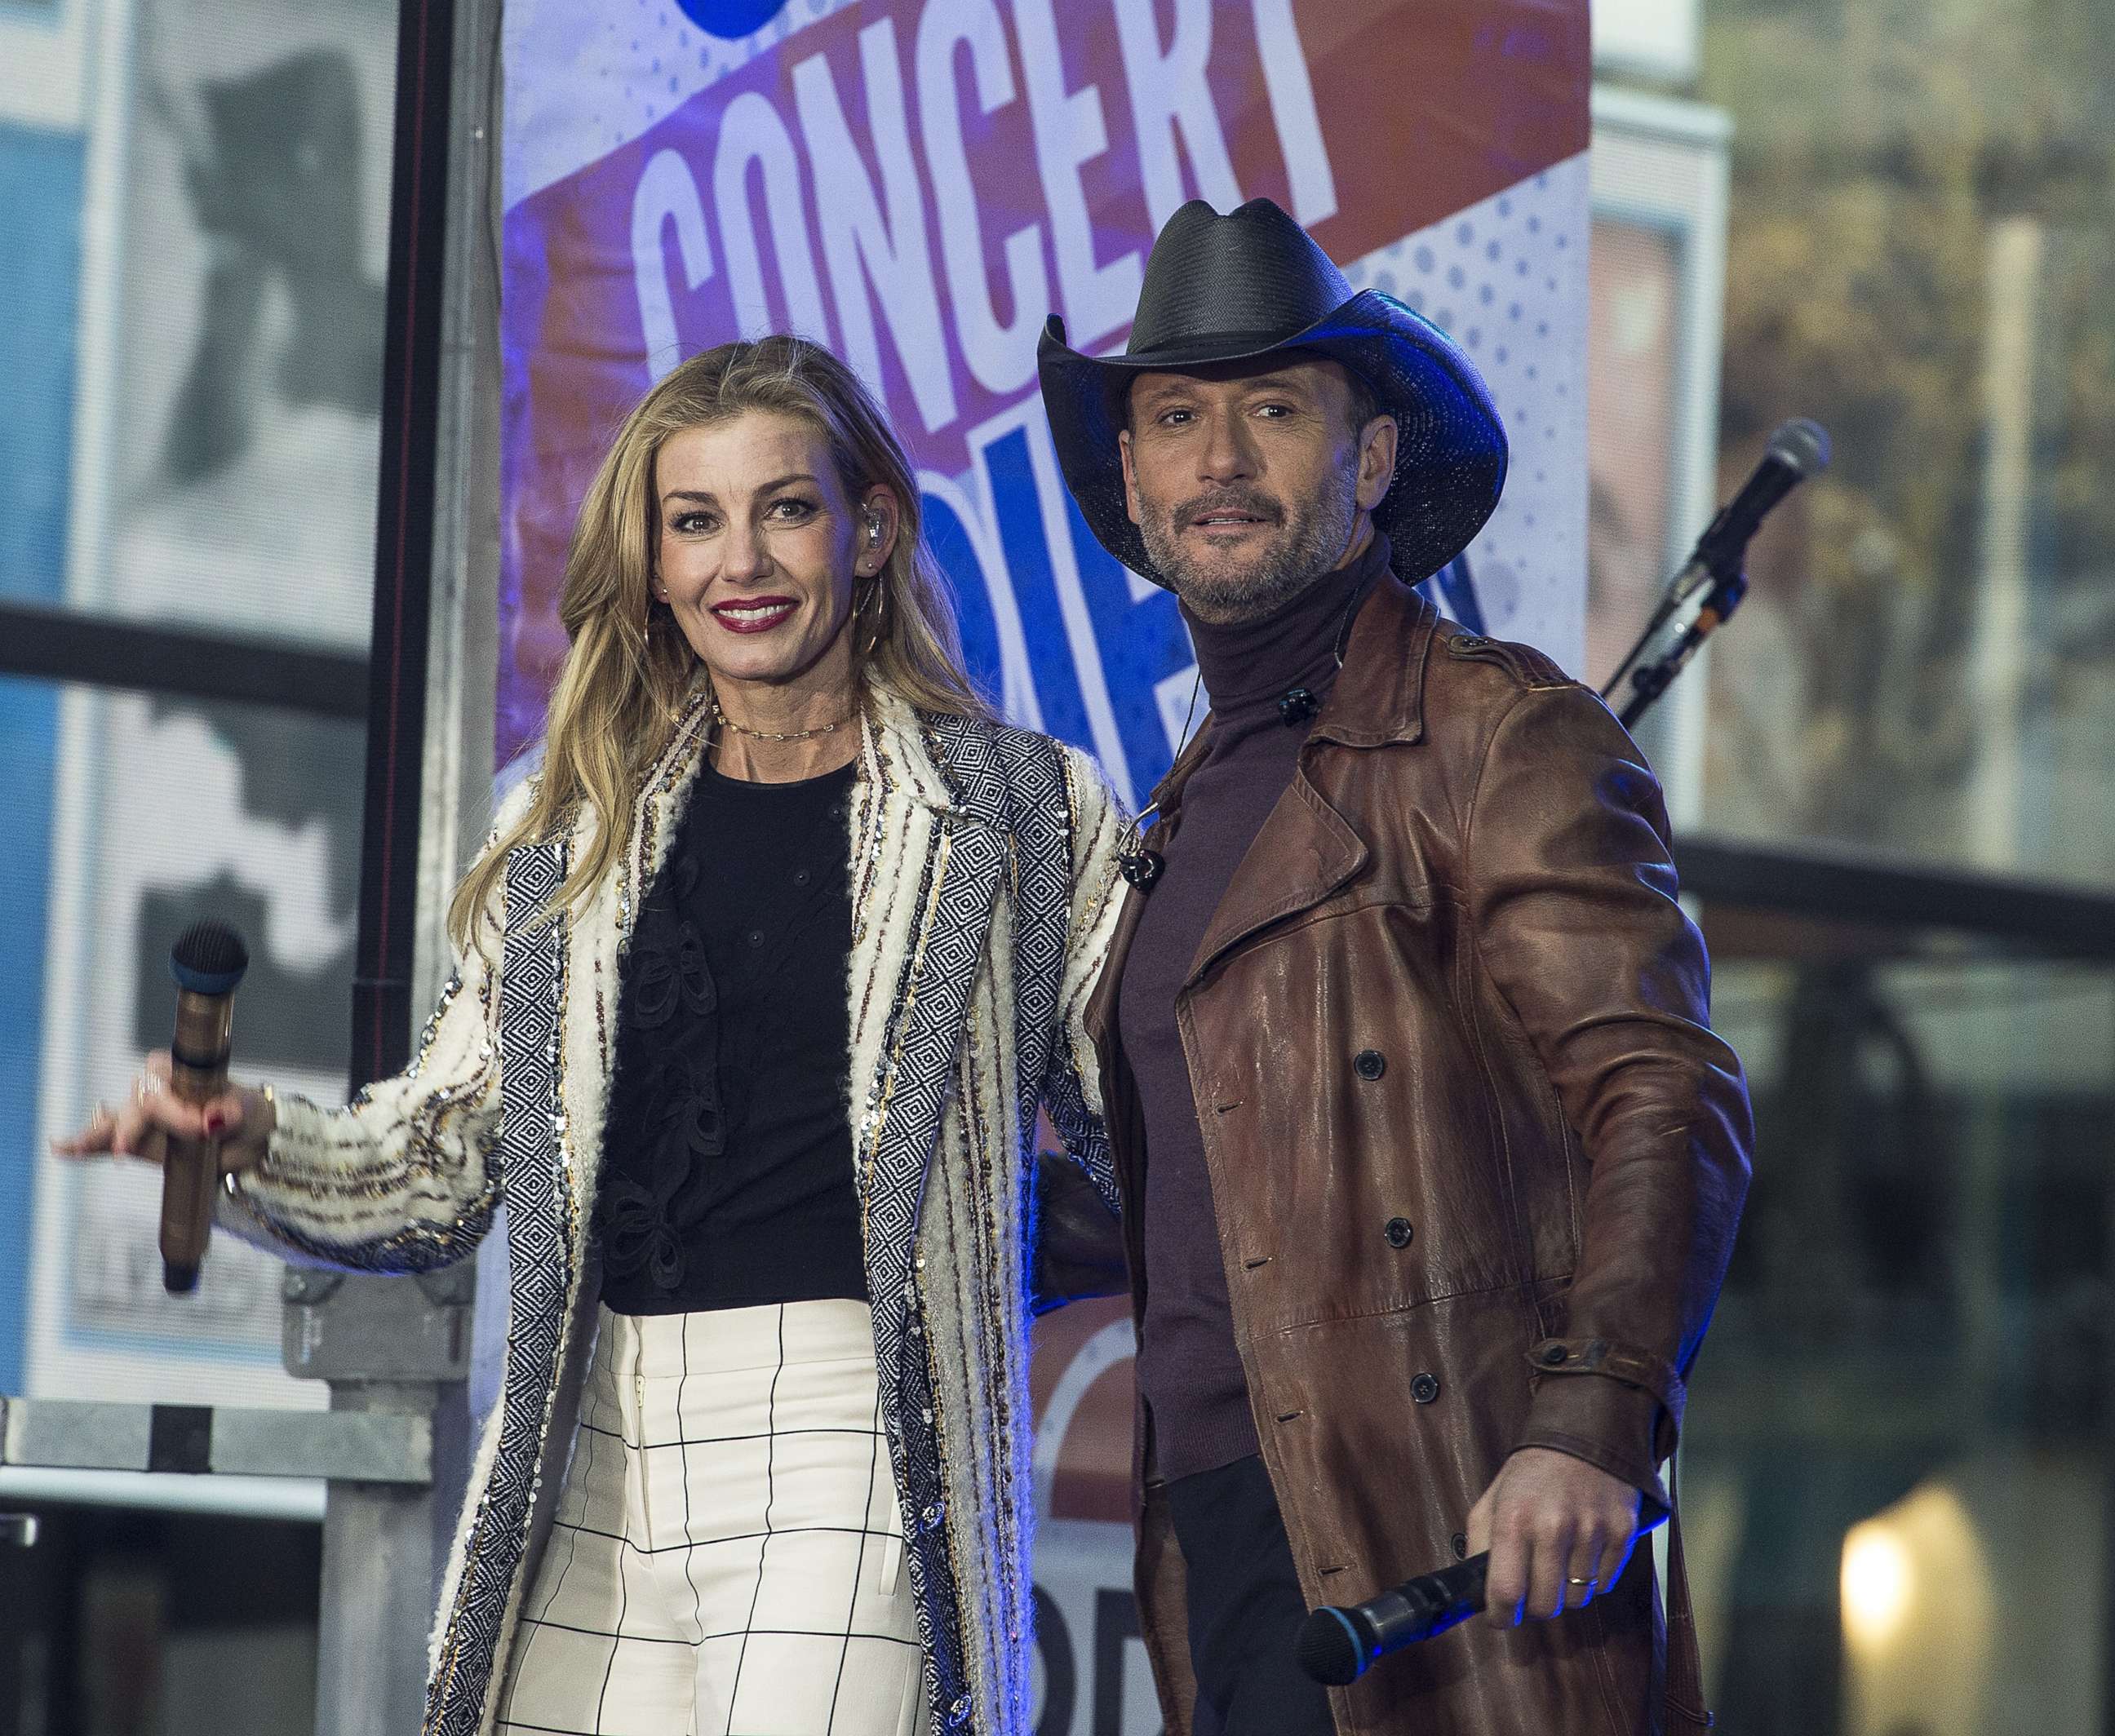 PHOTO: Faith Hill and Tim McGraw perform live at Rockefeller Plaza, Nov. 17, 2017, in New York City.